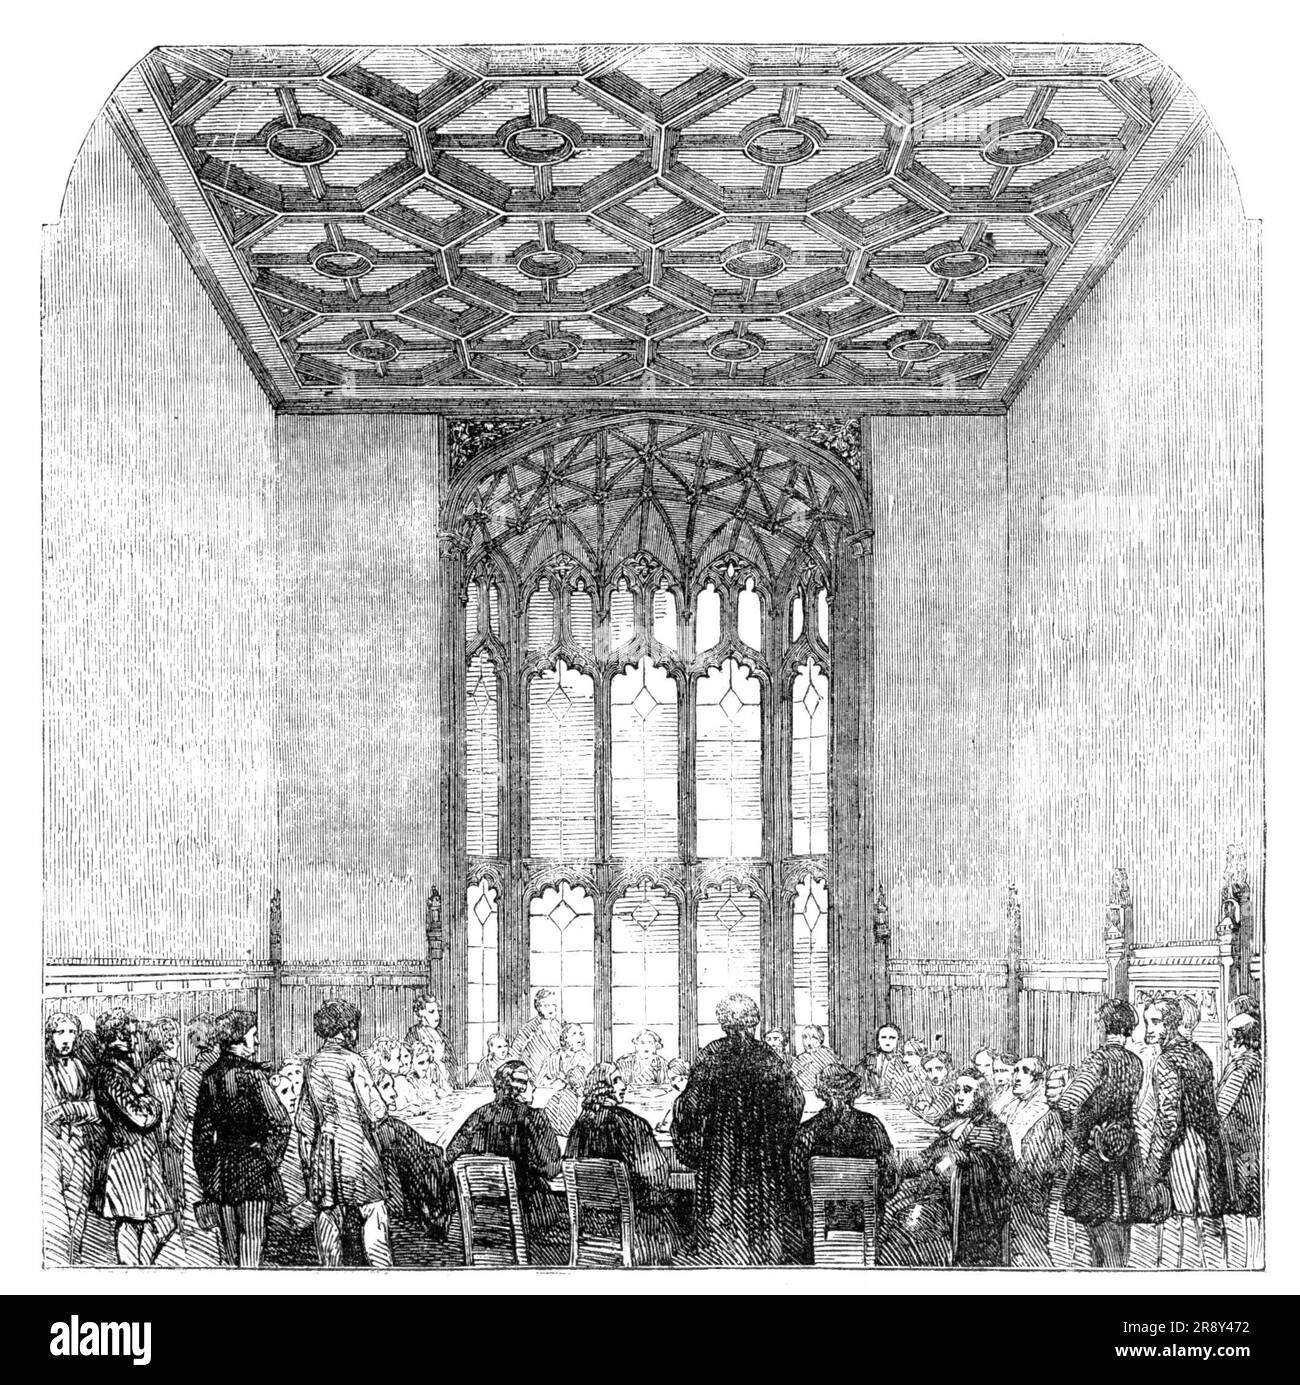 Committee-room, House of Commons, 1857. Interior of the Palace of Westminster, London. 'It would be difficult to point to any edifice, ancient or modern, in which the style and character of the architecture are more completely carried out than in the new Houses of Parliament. Every apartment and means of communication throughout the vast edifice has its characteristics of the Tudor palatial style, which Sir Charles Barry has adopted...[Depicted] is one of the south end Committee-rooms in the river front of the Palace: it has a beautiful window, and a ceiling divided into compartments by deep m Stock Photo